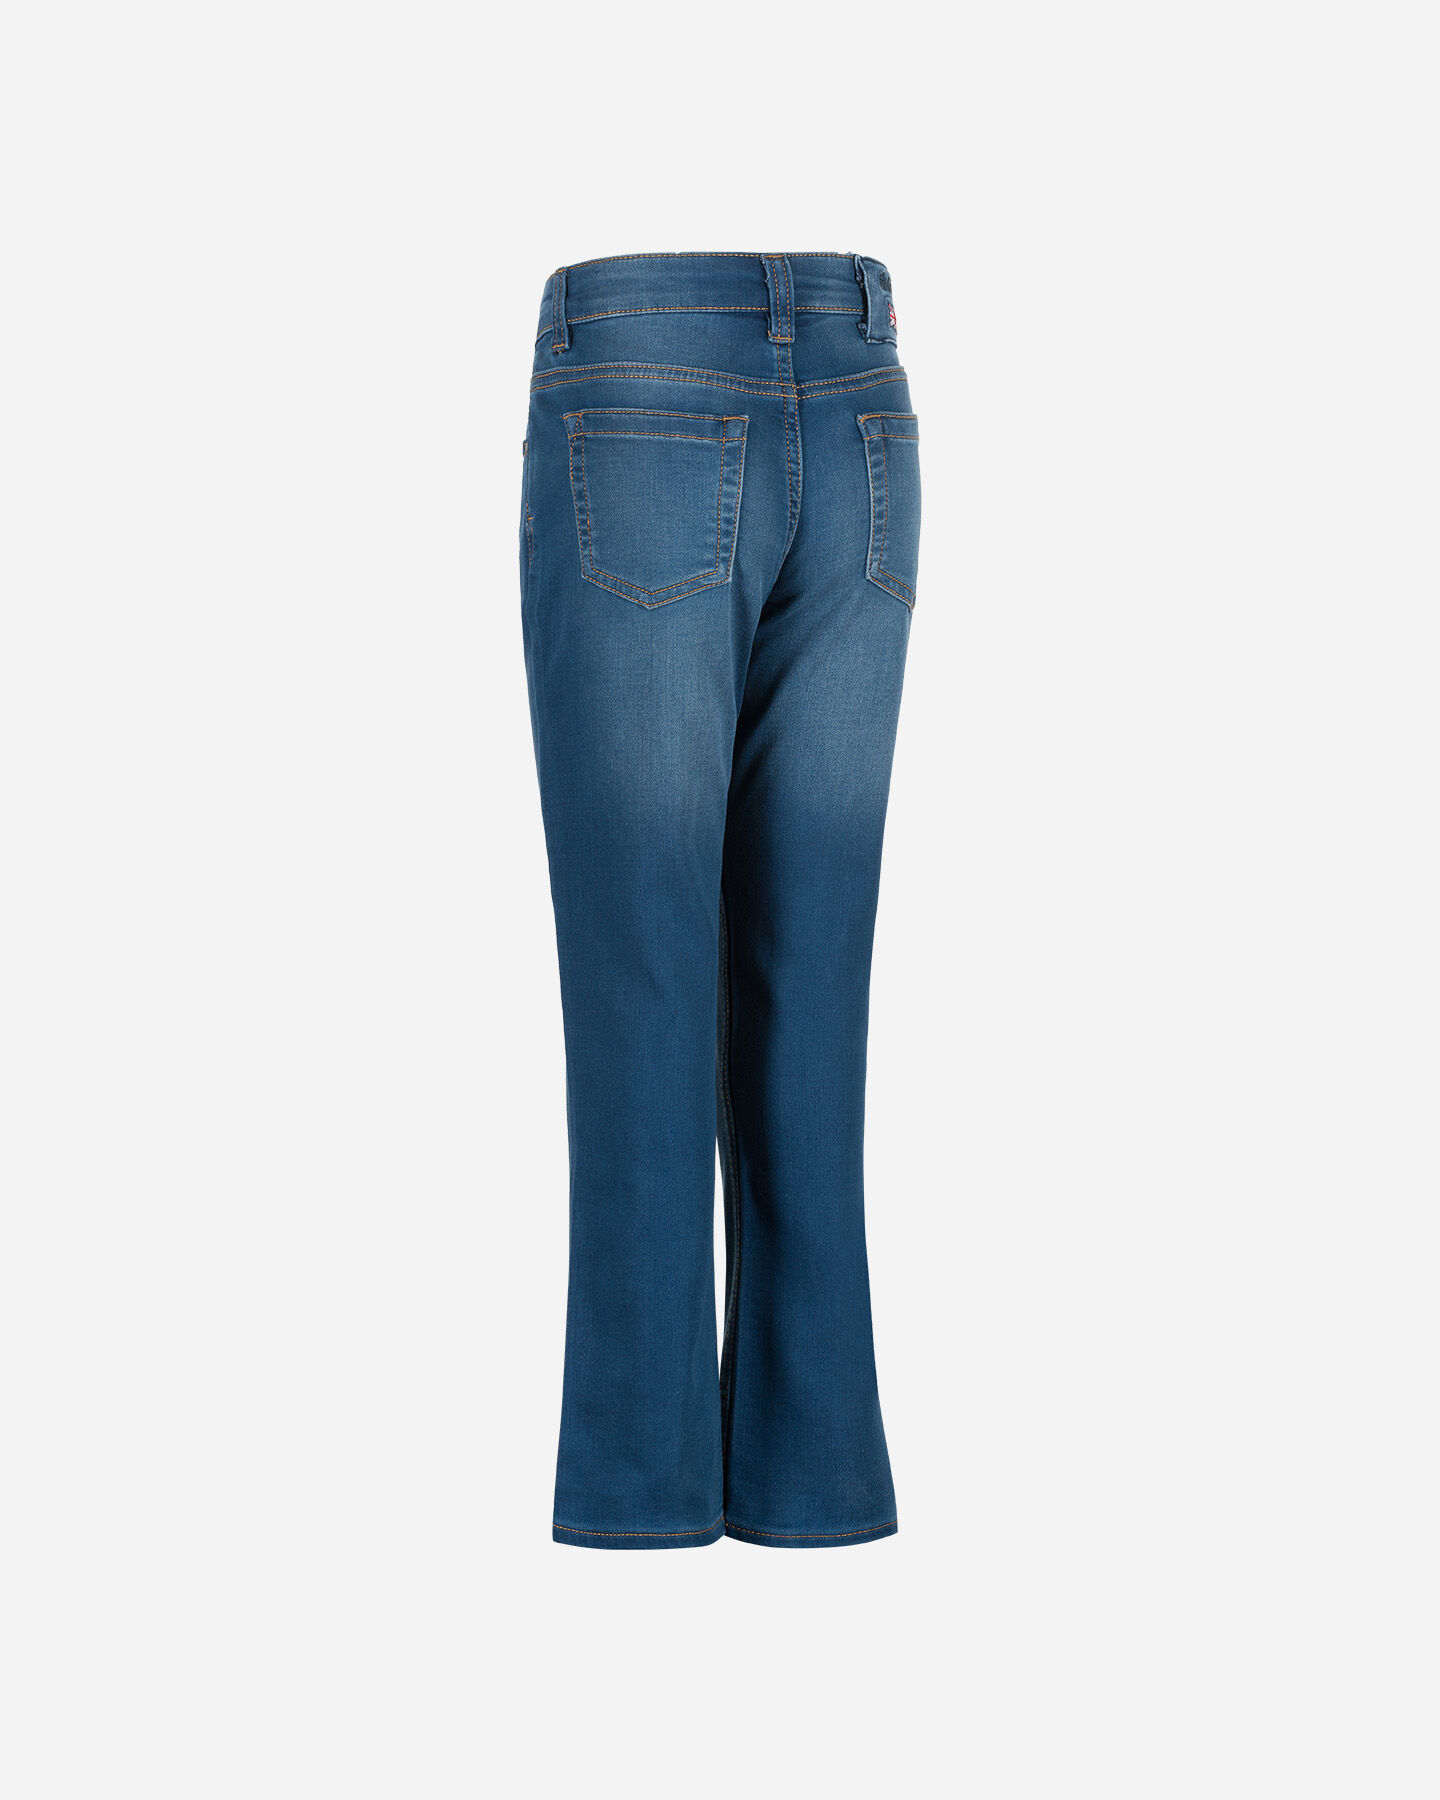  Jeans ADMIRAL BASIC JR S4075811|DD|6A scatto 1